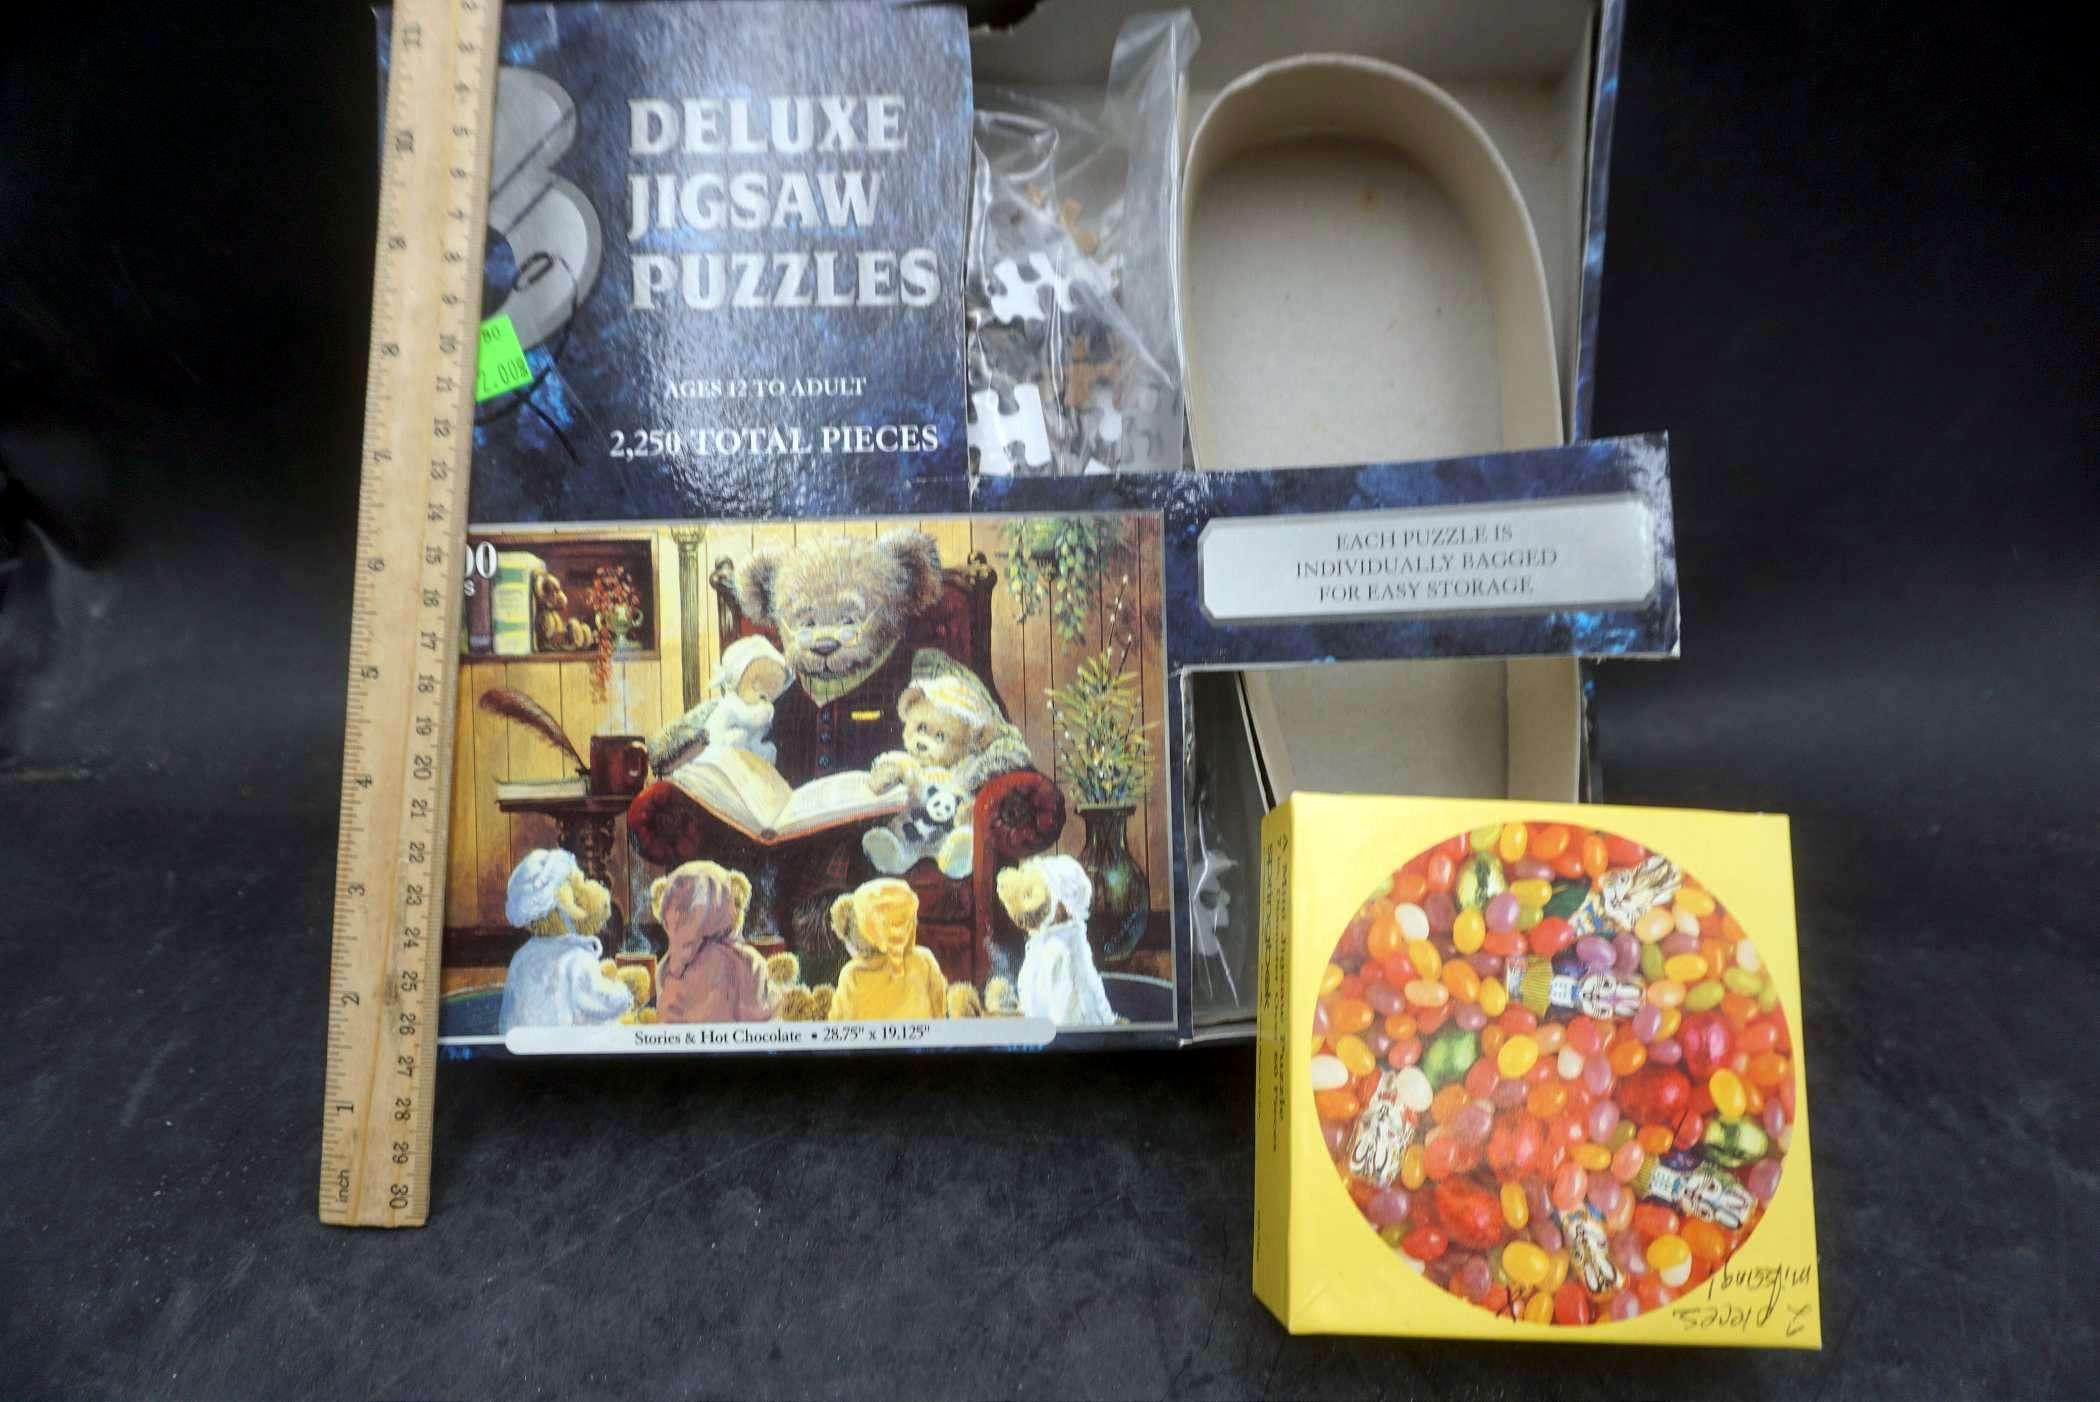 3 Deluxe Jigsaw Puzzles (2,250 Total Pieces)